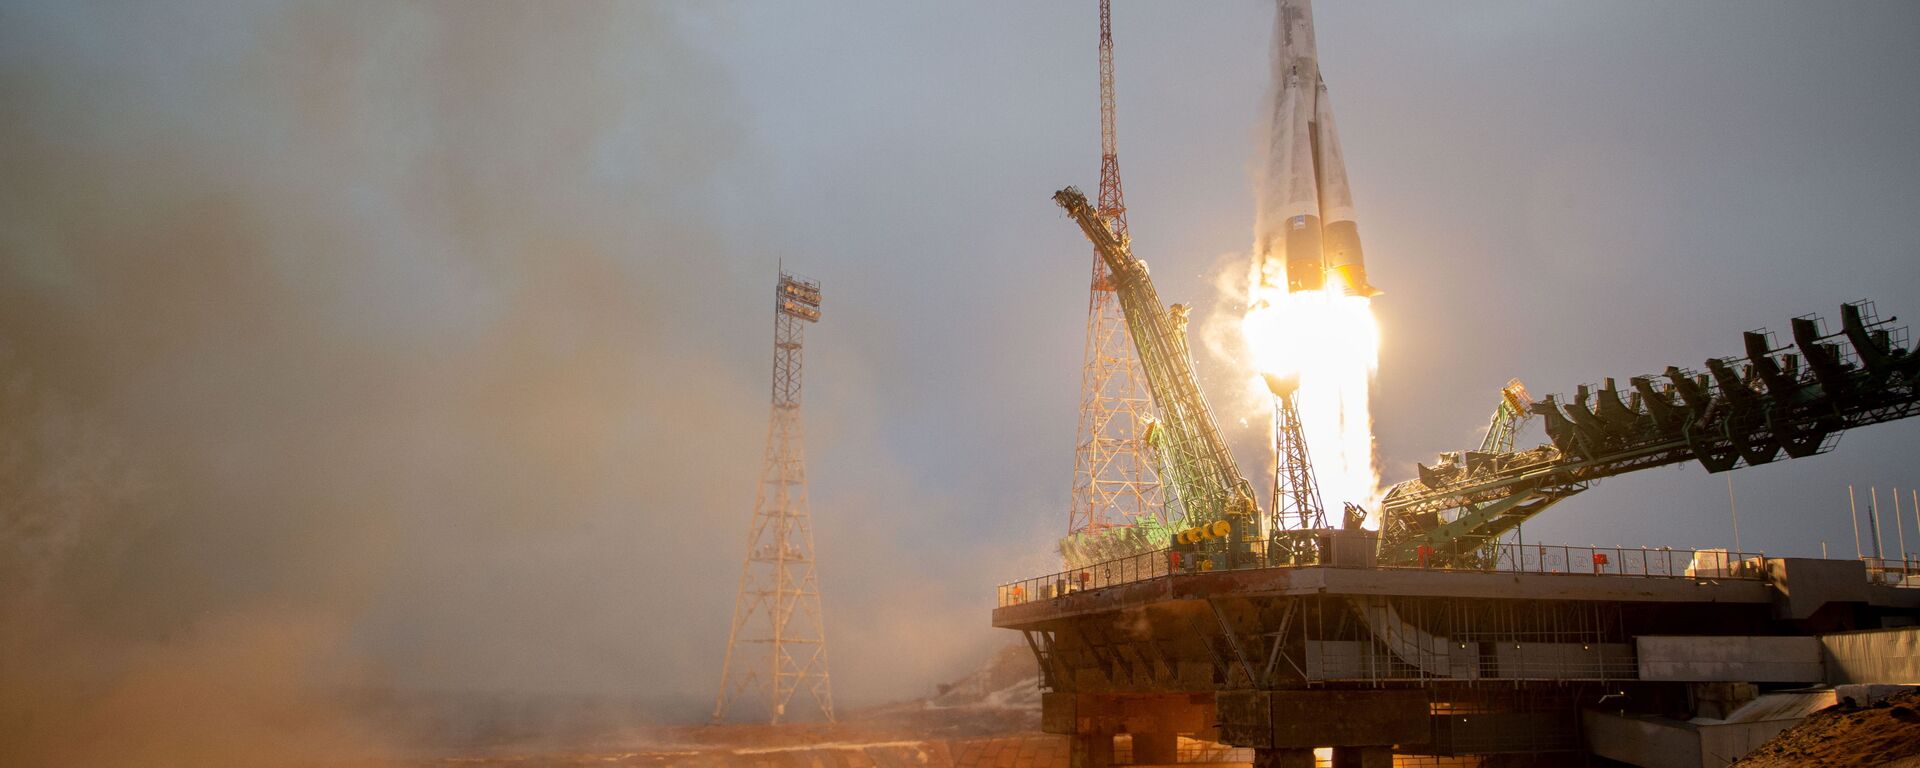 The Soyuz spacecraft with the Arktika-M satellite for monitoring the climate and environment in the Arctic, blasts off from the launchpad at the Baikonur Cosmodrome, Kazakhstan February 28, 2021. - Sputnik International, 1920, 11.11.2021